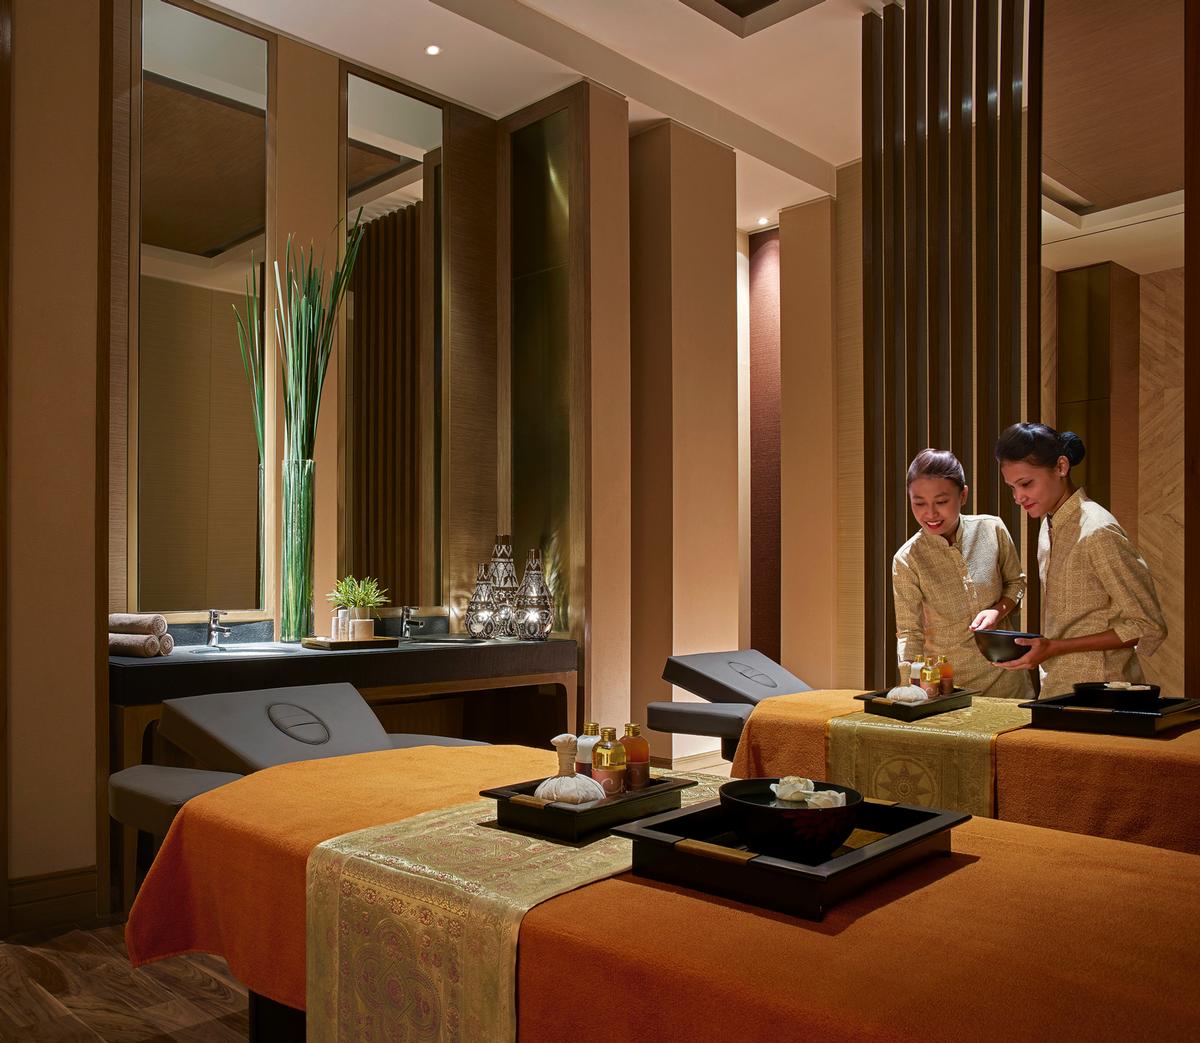 Spa suites and treatment rooms include their own private bath, shower, steam, relaxation lounge and changing and vanity areas / Shangri-La